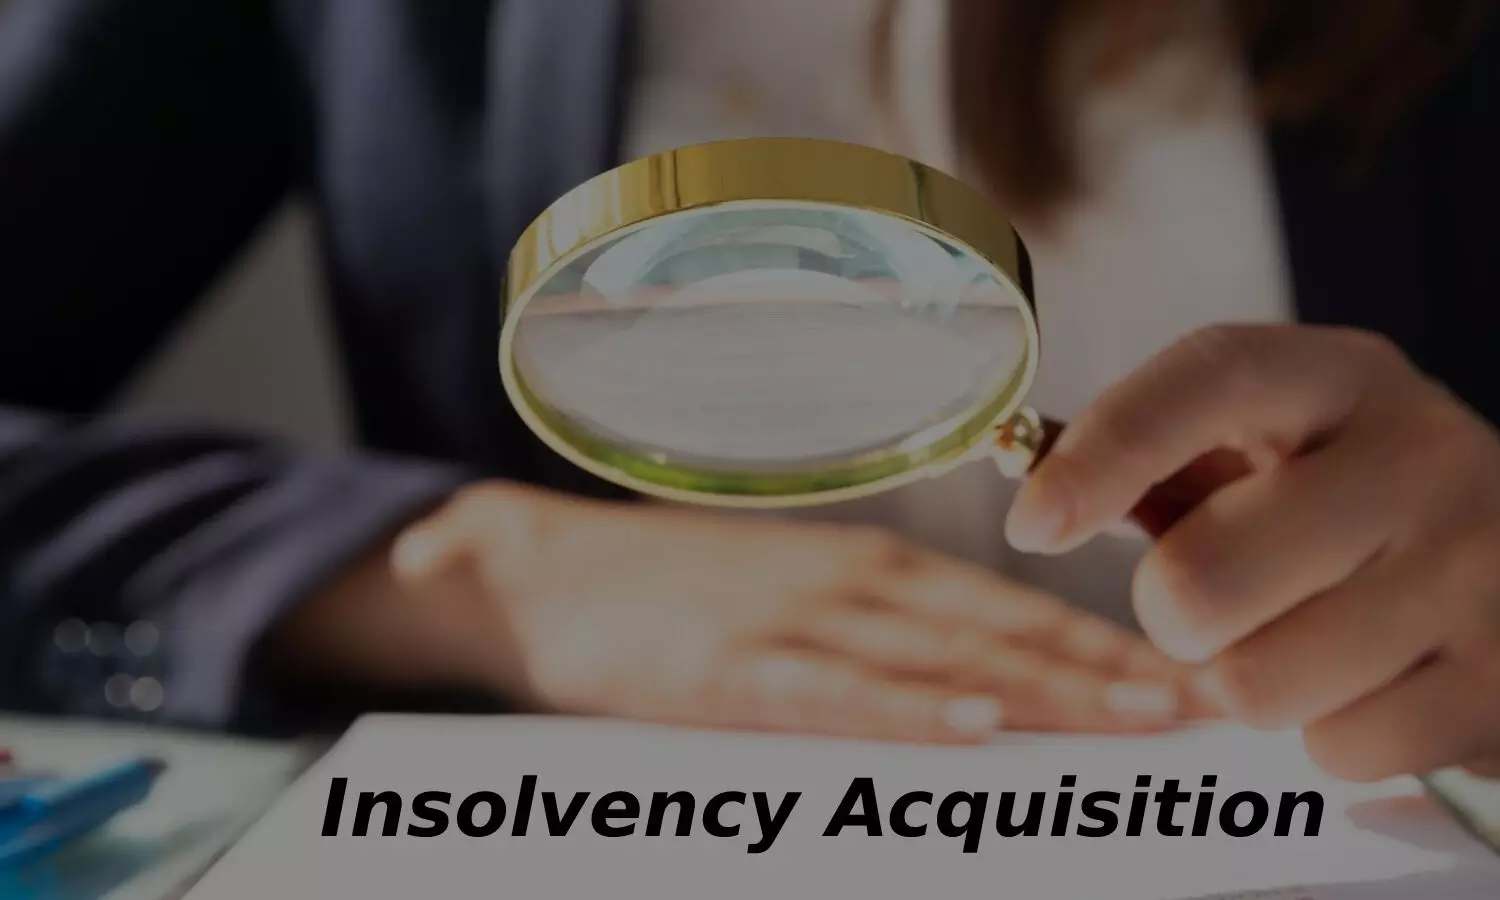 What are the benefits of acquisition at the time of insolvency